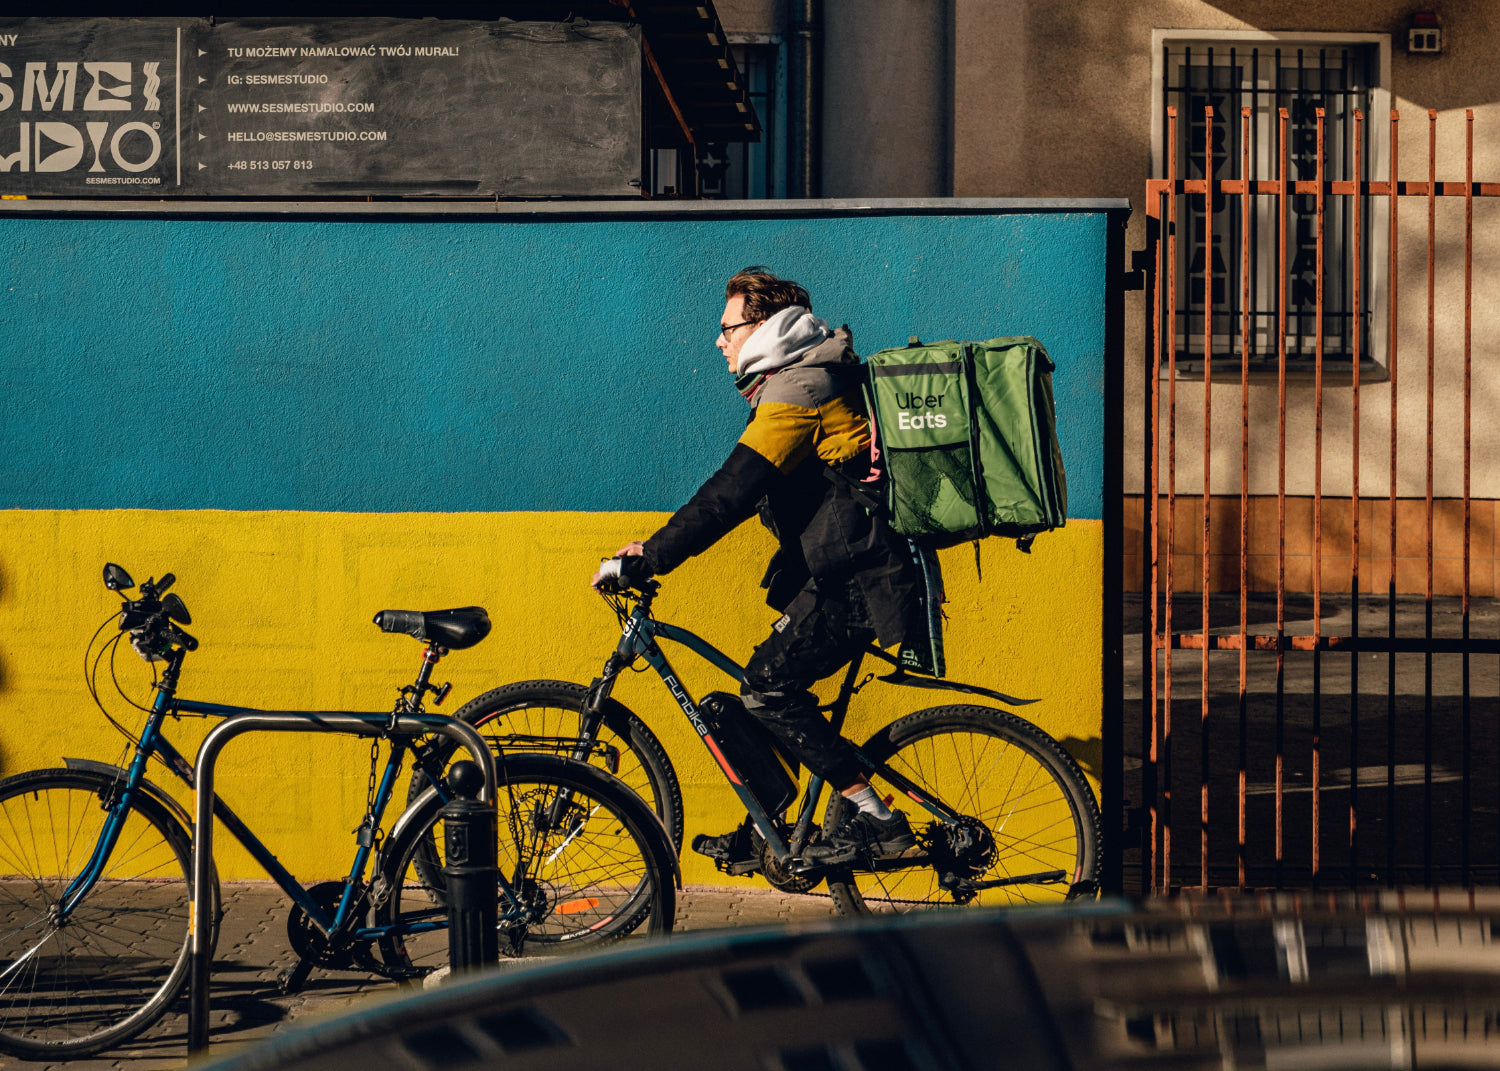 A person does gig work by delivering food by bike in a city